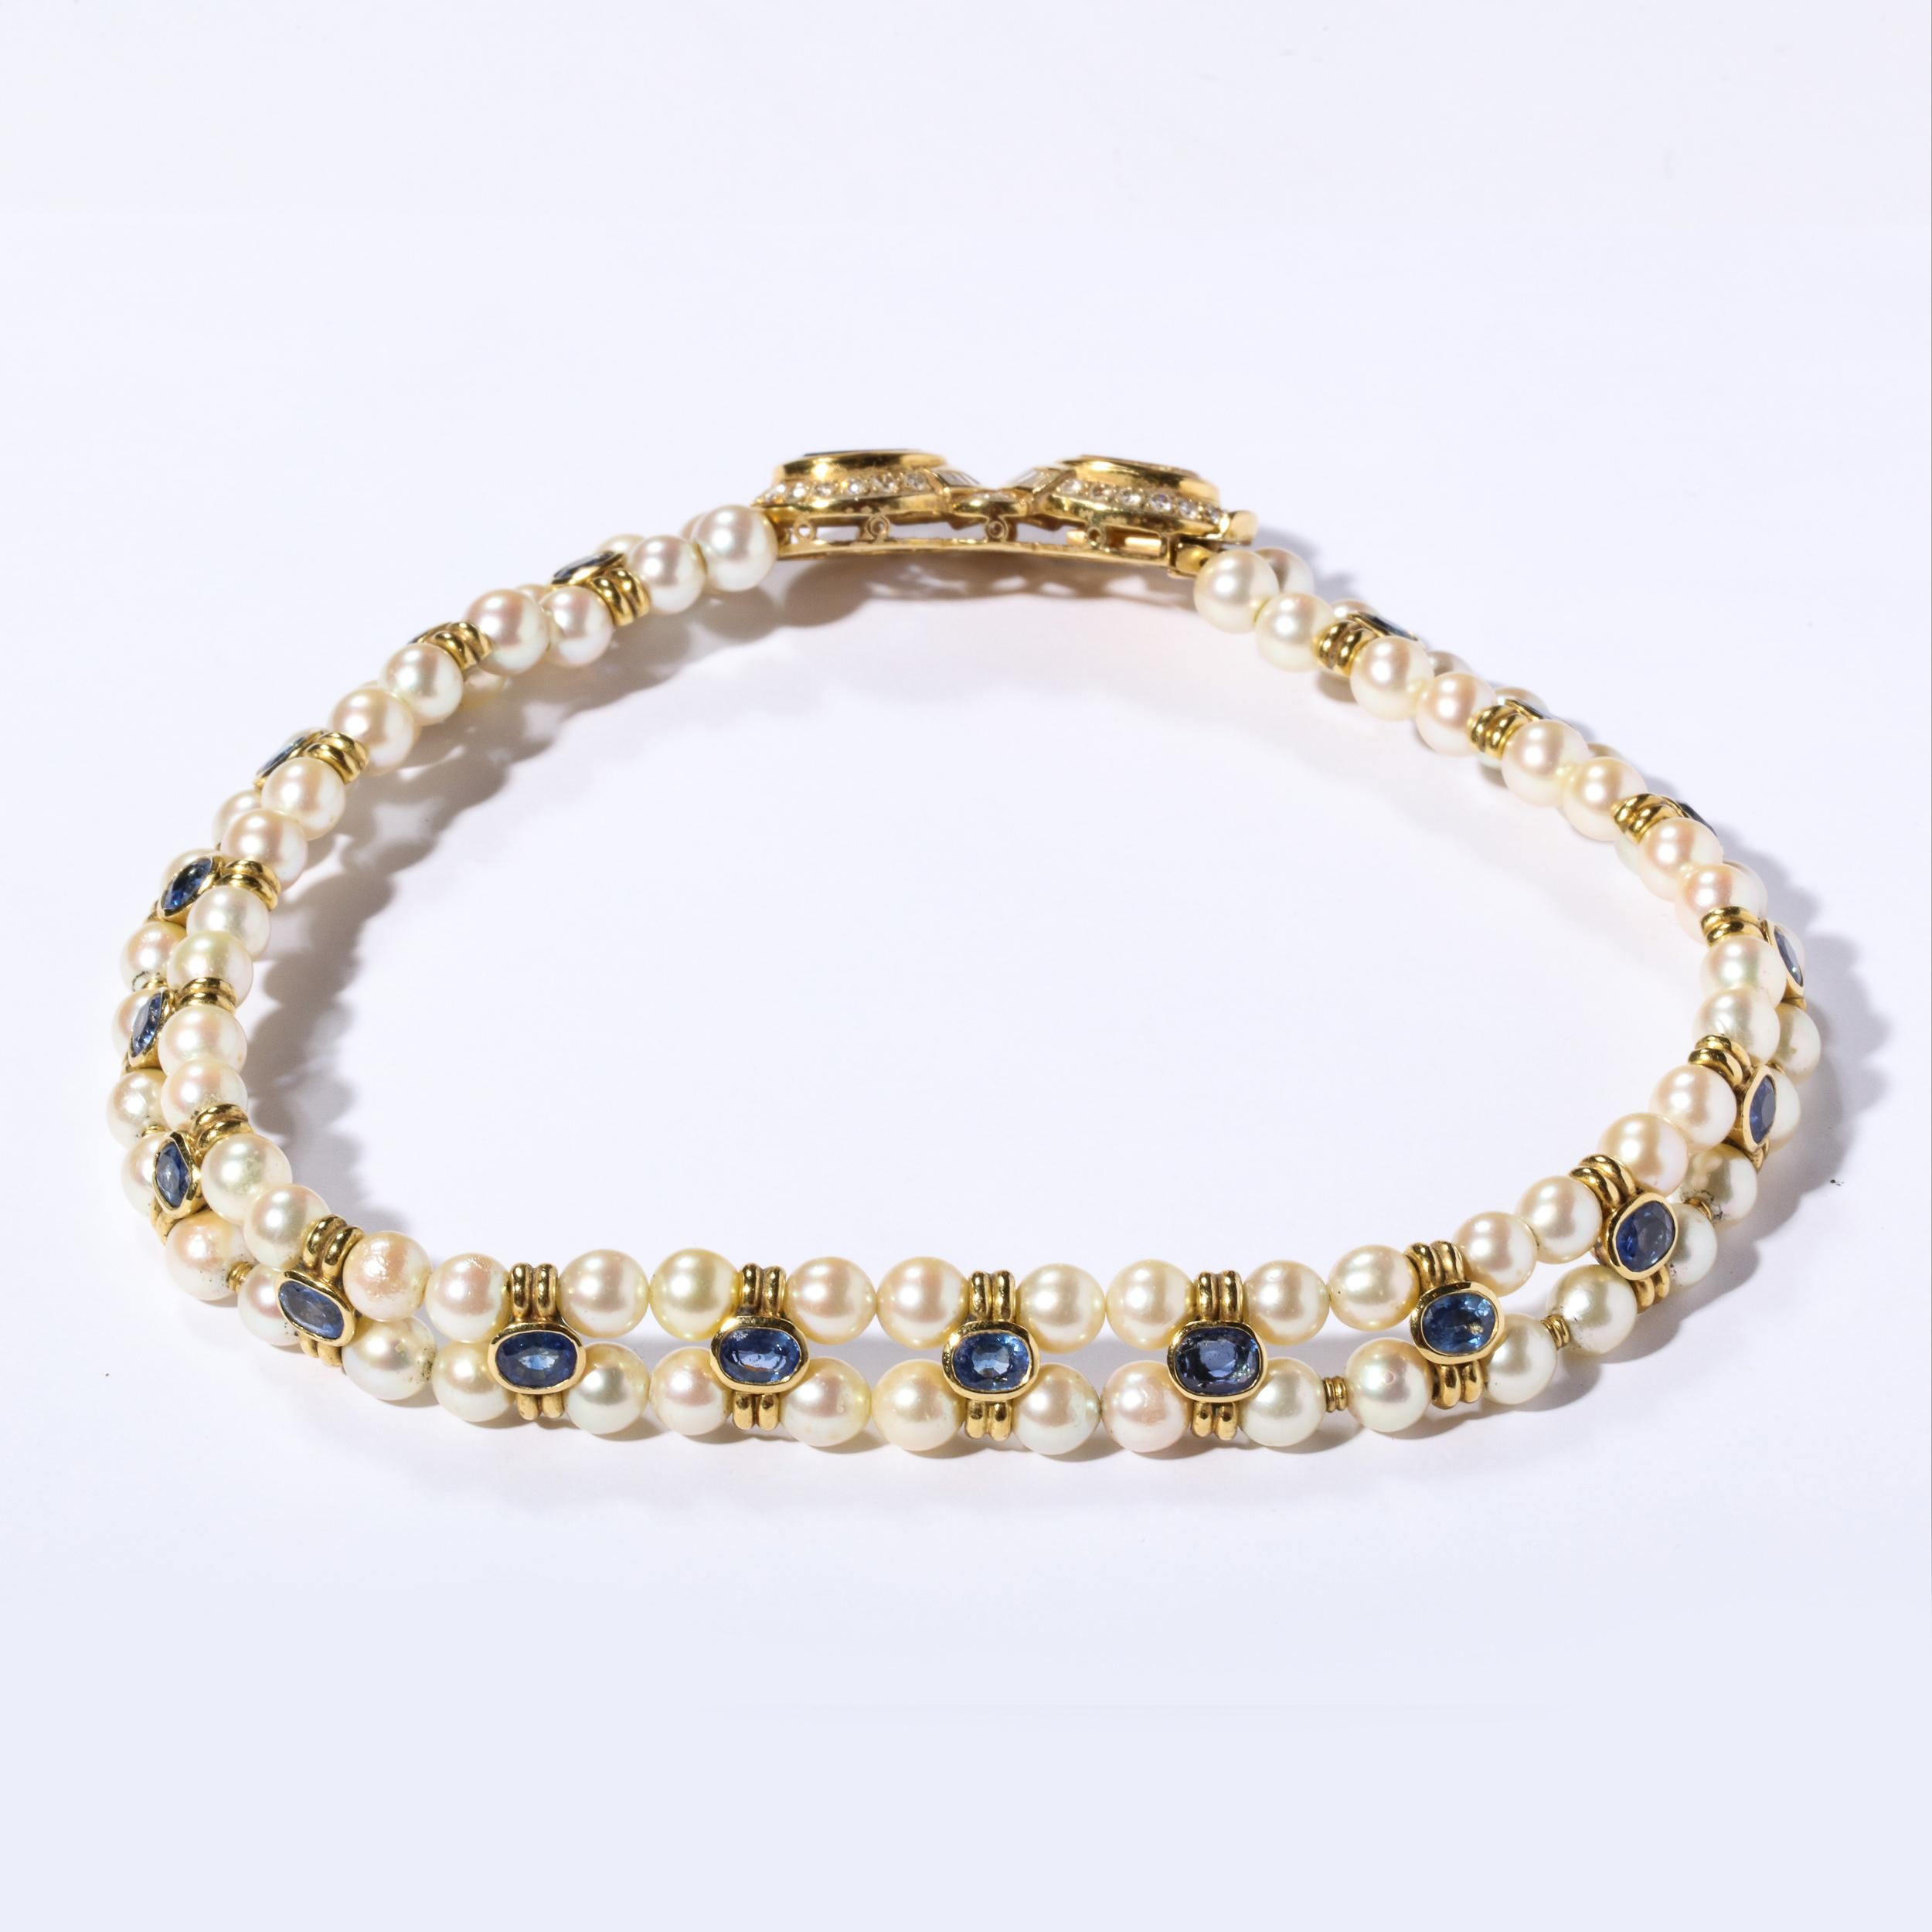 Women's Double Strand Pearl Necklace  with Carved Citrine & Iolite, 18k and Diamonds  For Sale